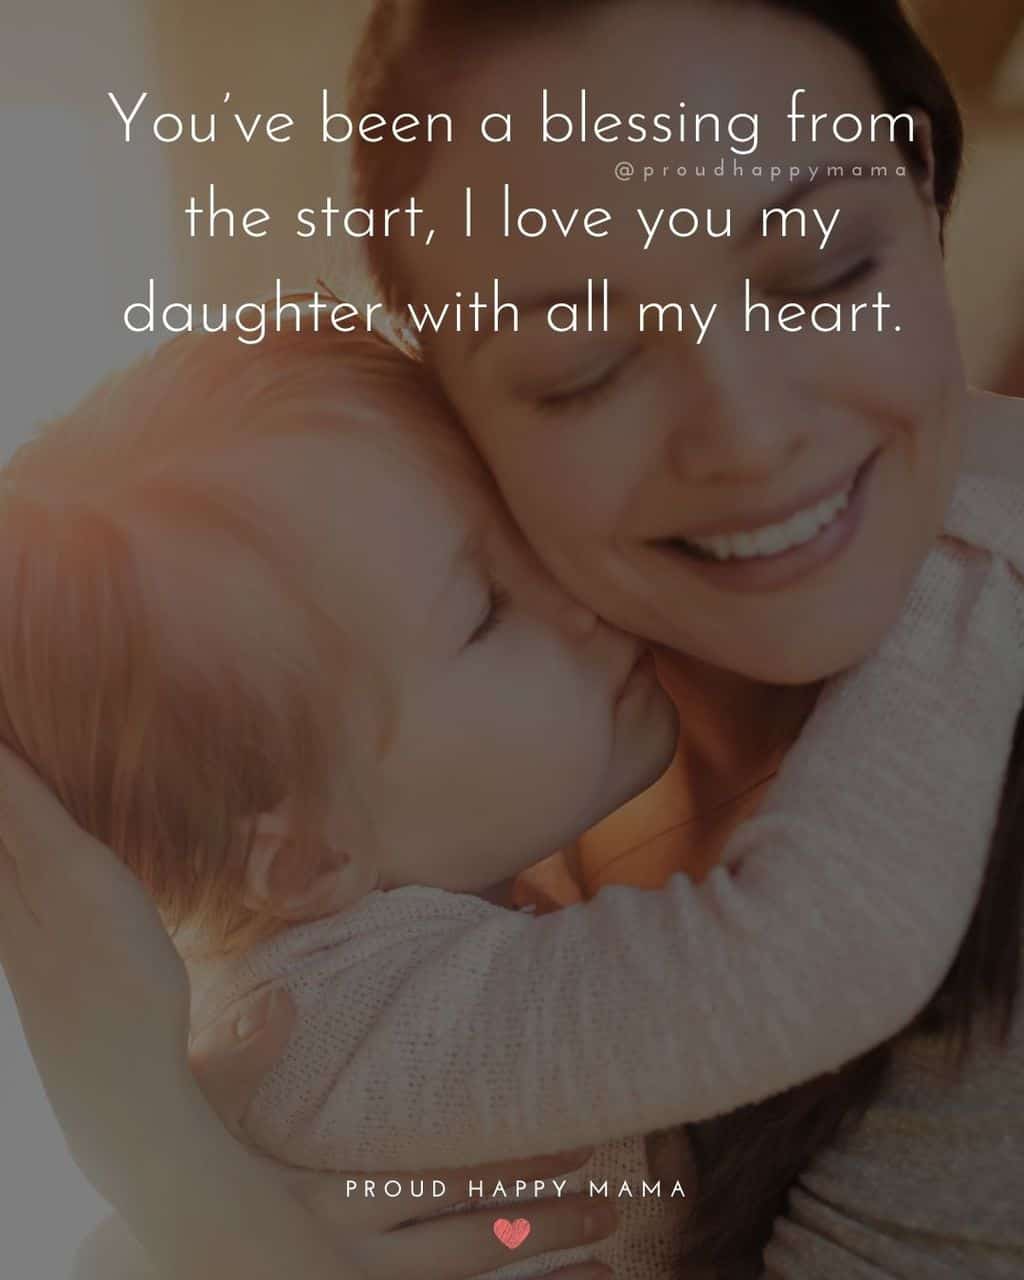 i love my daughter quotes -Youve-been-a-blessing-from-the-start-I-love-you-my-daughter-with-all-my-heart.